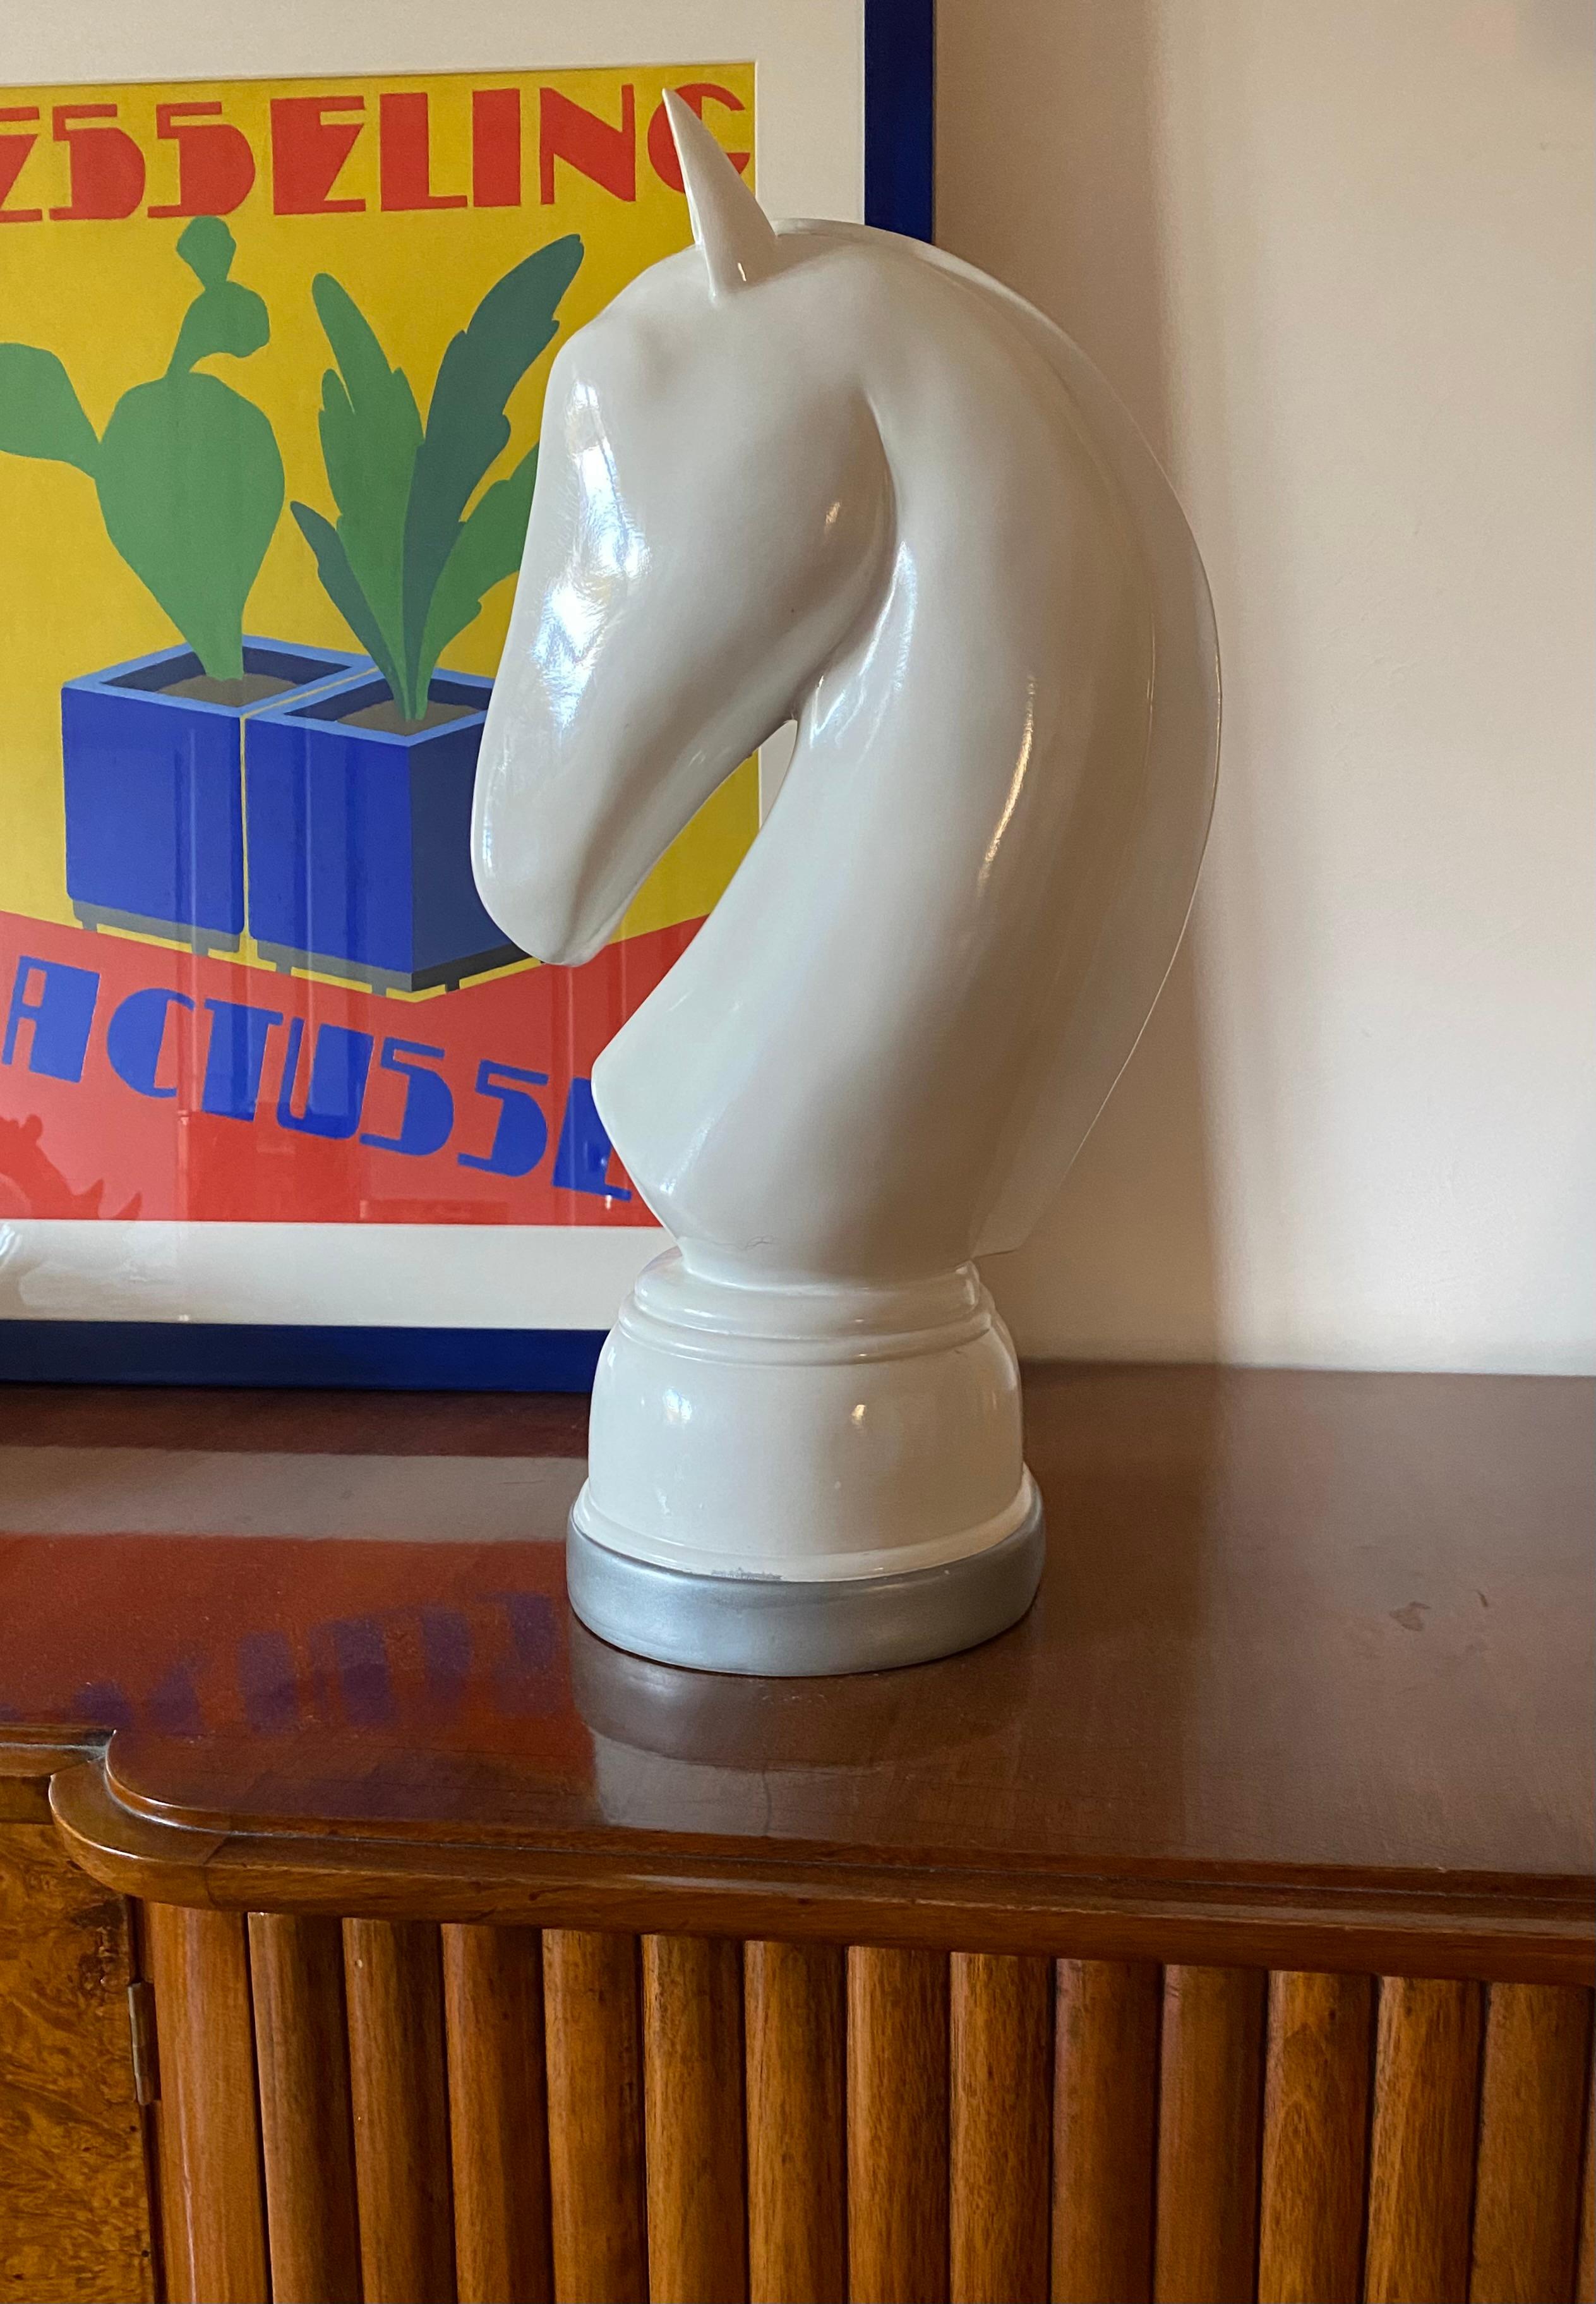 White lacquered resin chess horse sculpture

Italy 1970s

H 50 cm x 25 cm x 20 cm

Conditions: excellent